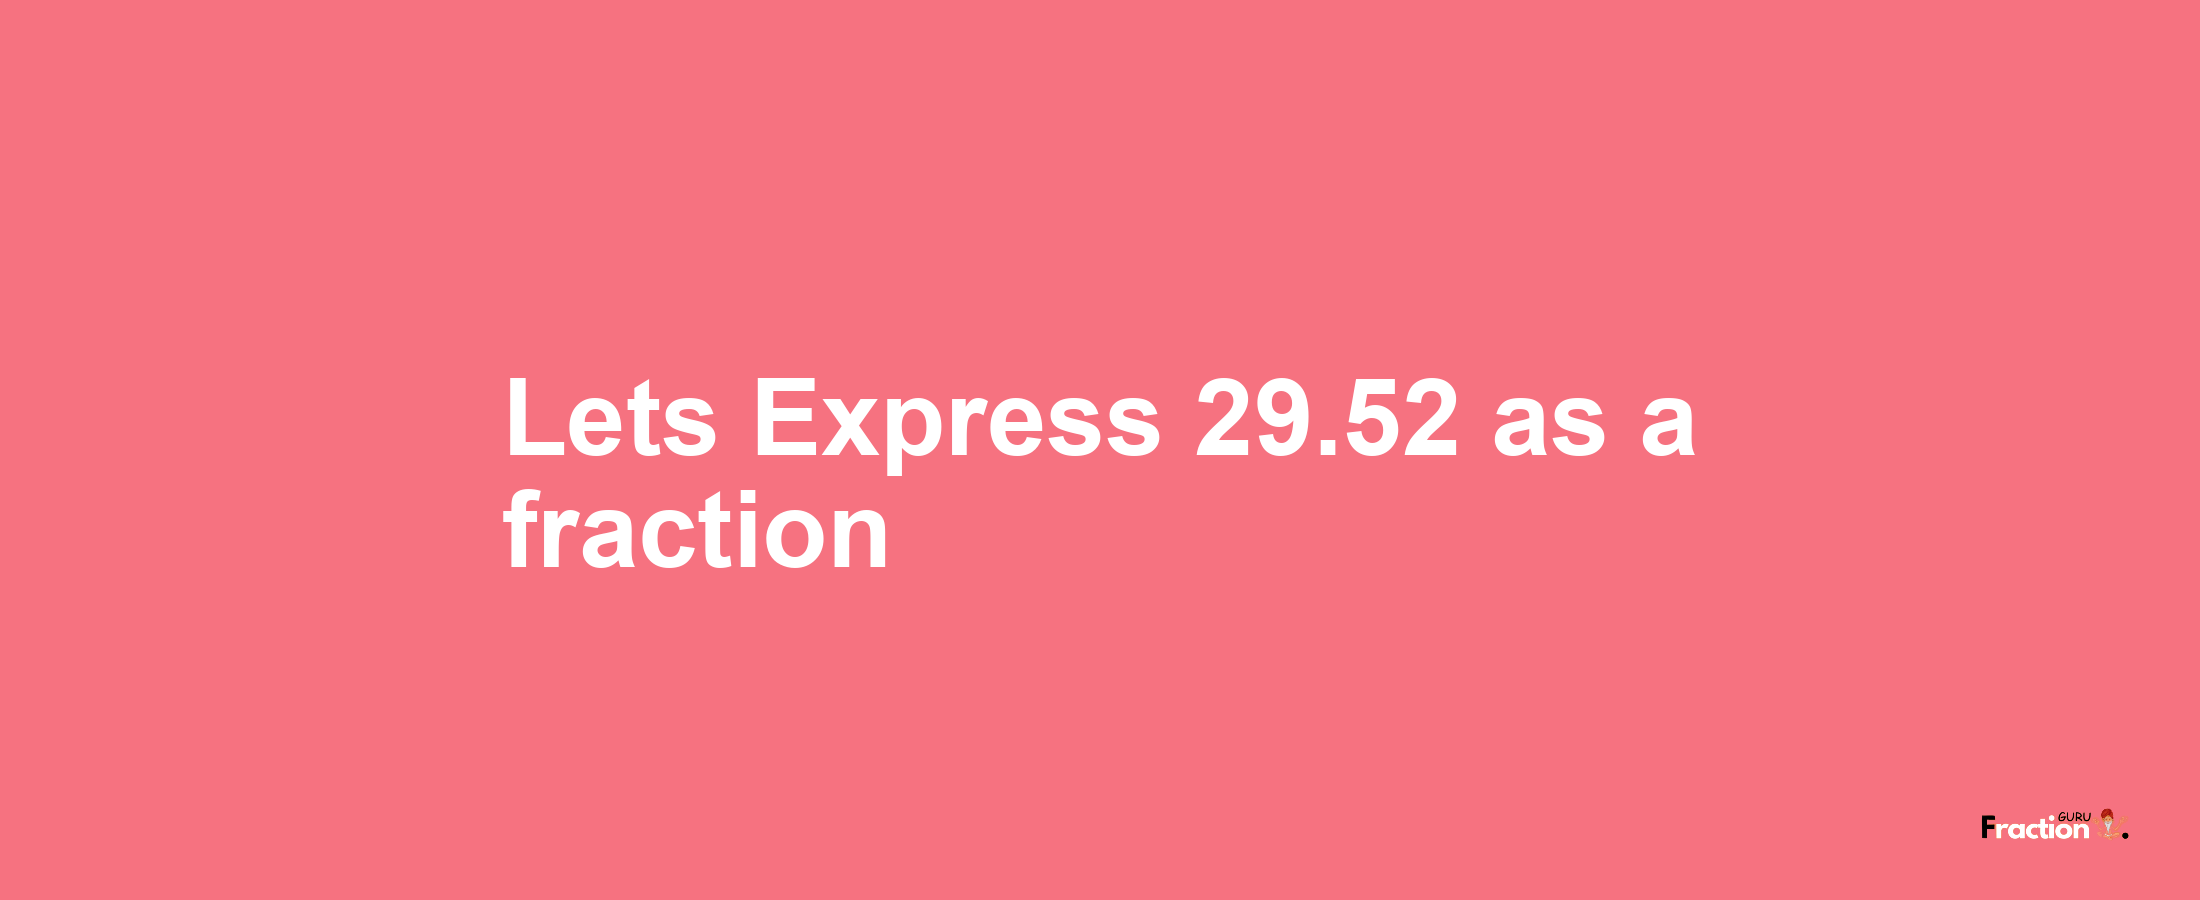 Lets Express 29.52 as afraction